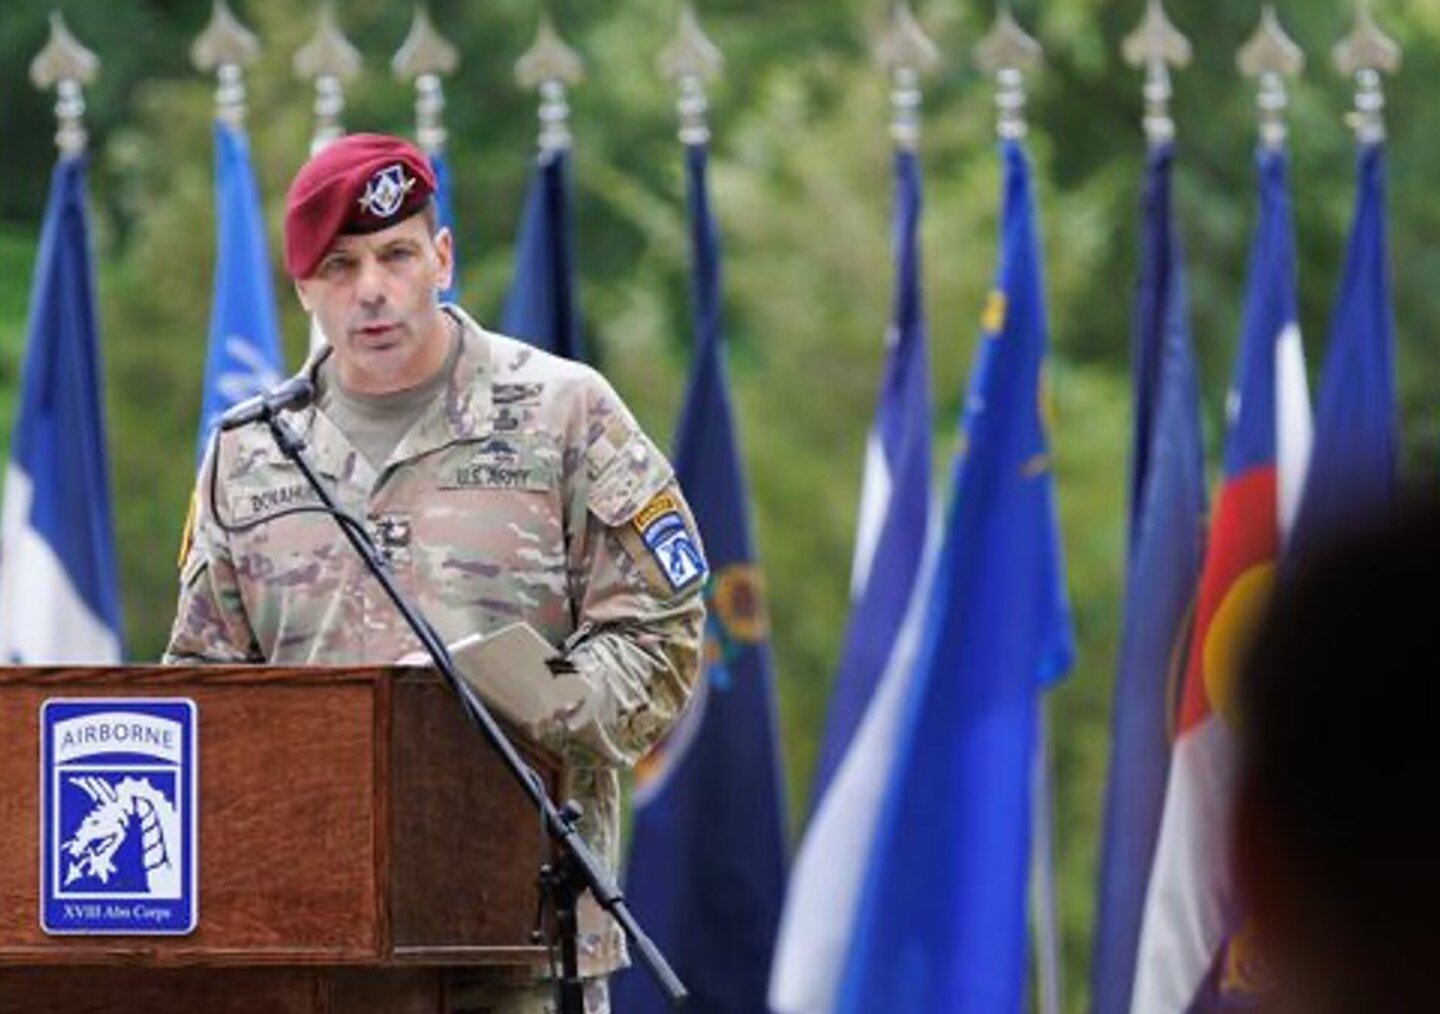 ‘The Cumberland County Veterans Day parade is of considerable significance for those of us still serving at Fort Liberty, and we could not do what we do without the support of this amazing community,’ says Lt. Gen. Christopher Donahue, who is commanding general of Fort Liberty and the XVIII Airborne Corps.